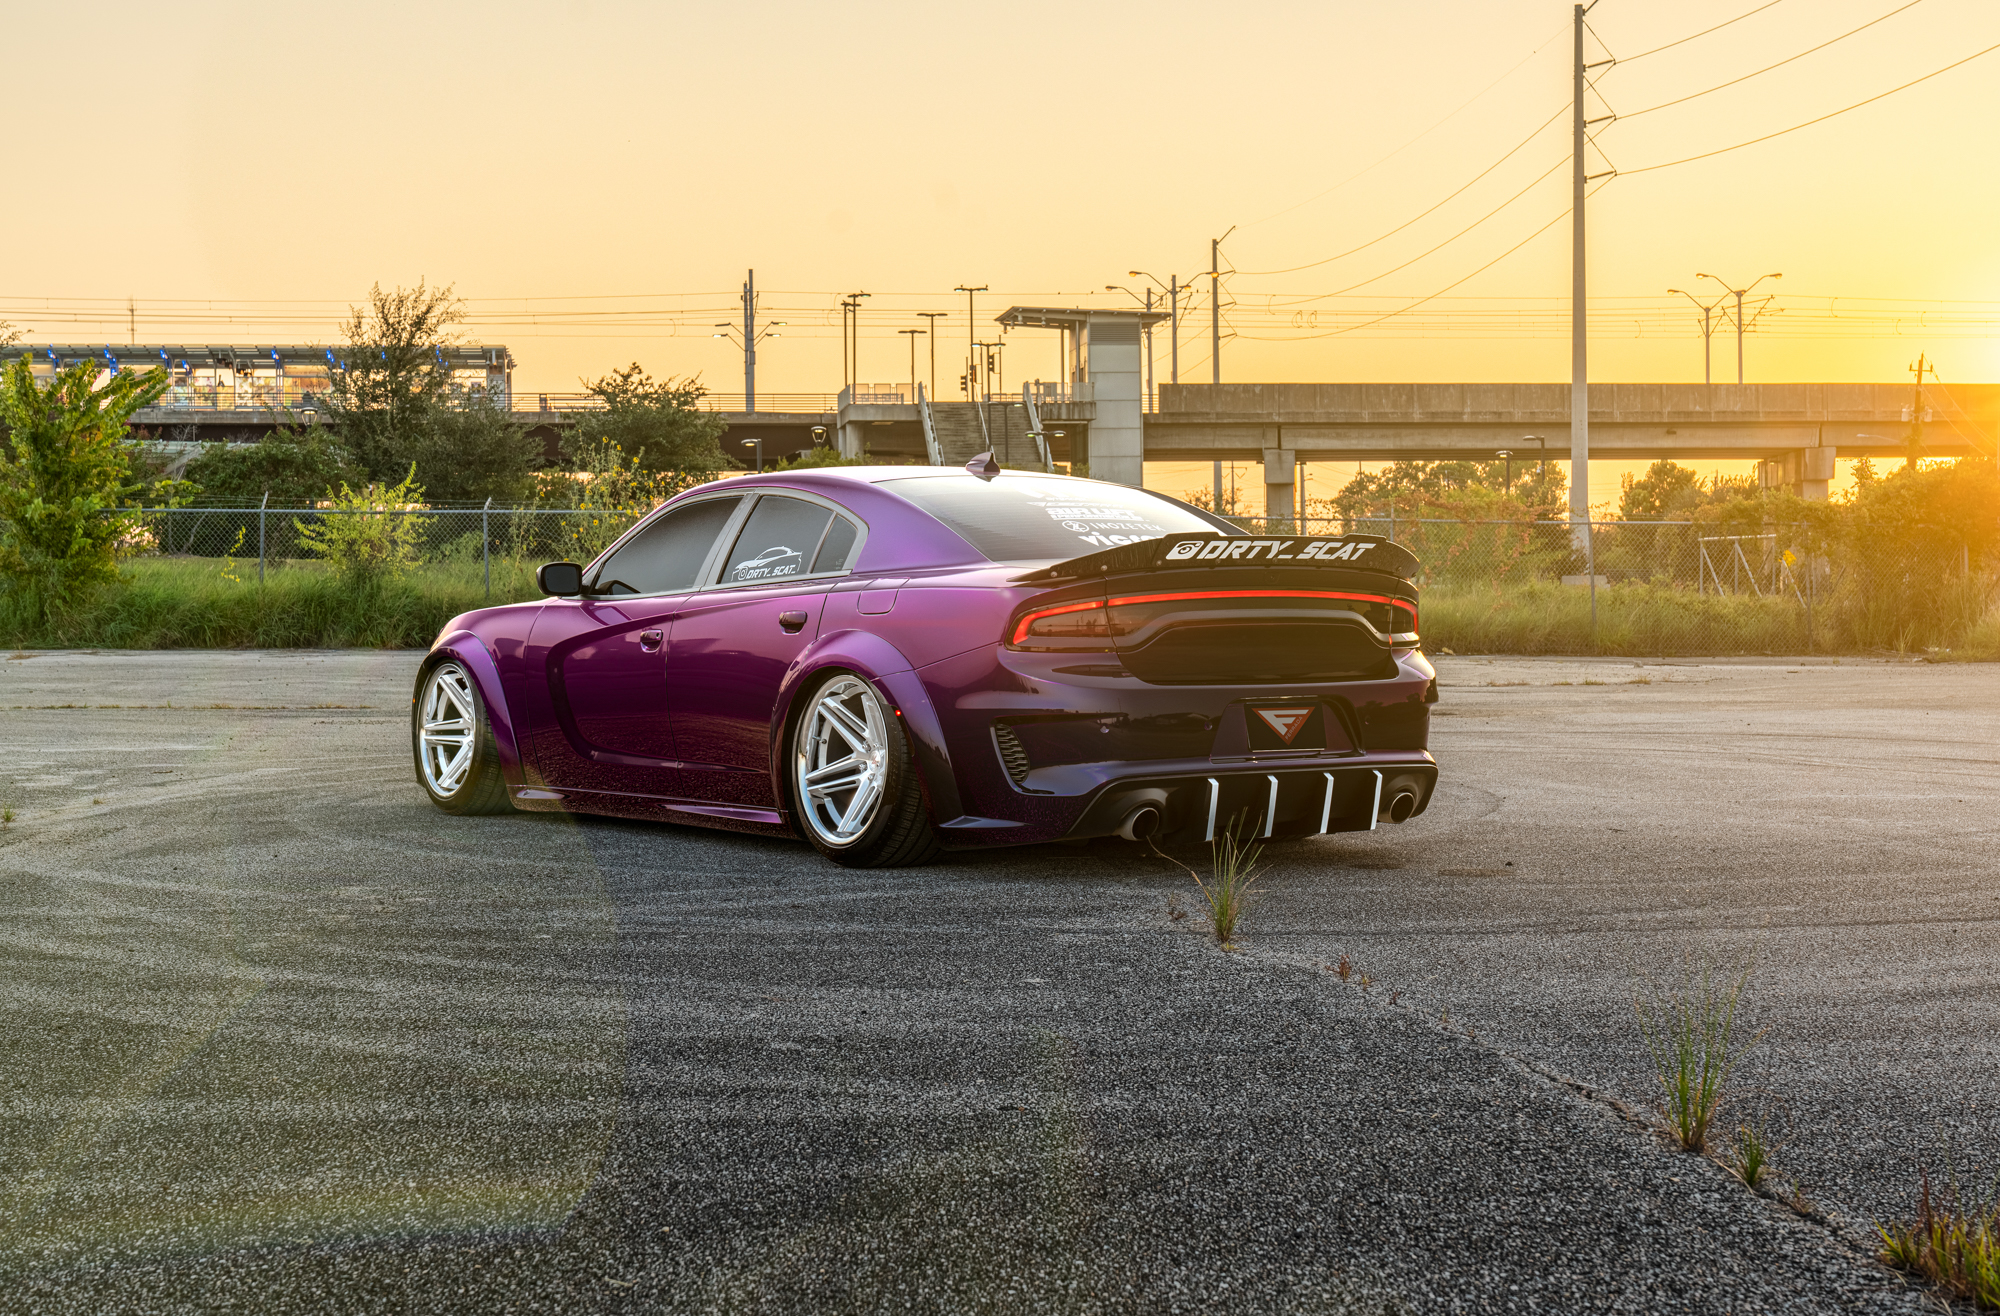 Dodge Charger Widebody (Purple) - DAF CM1 MS (5 of 8)